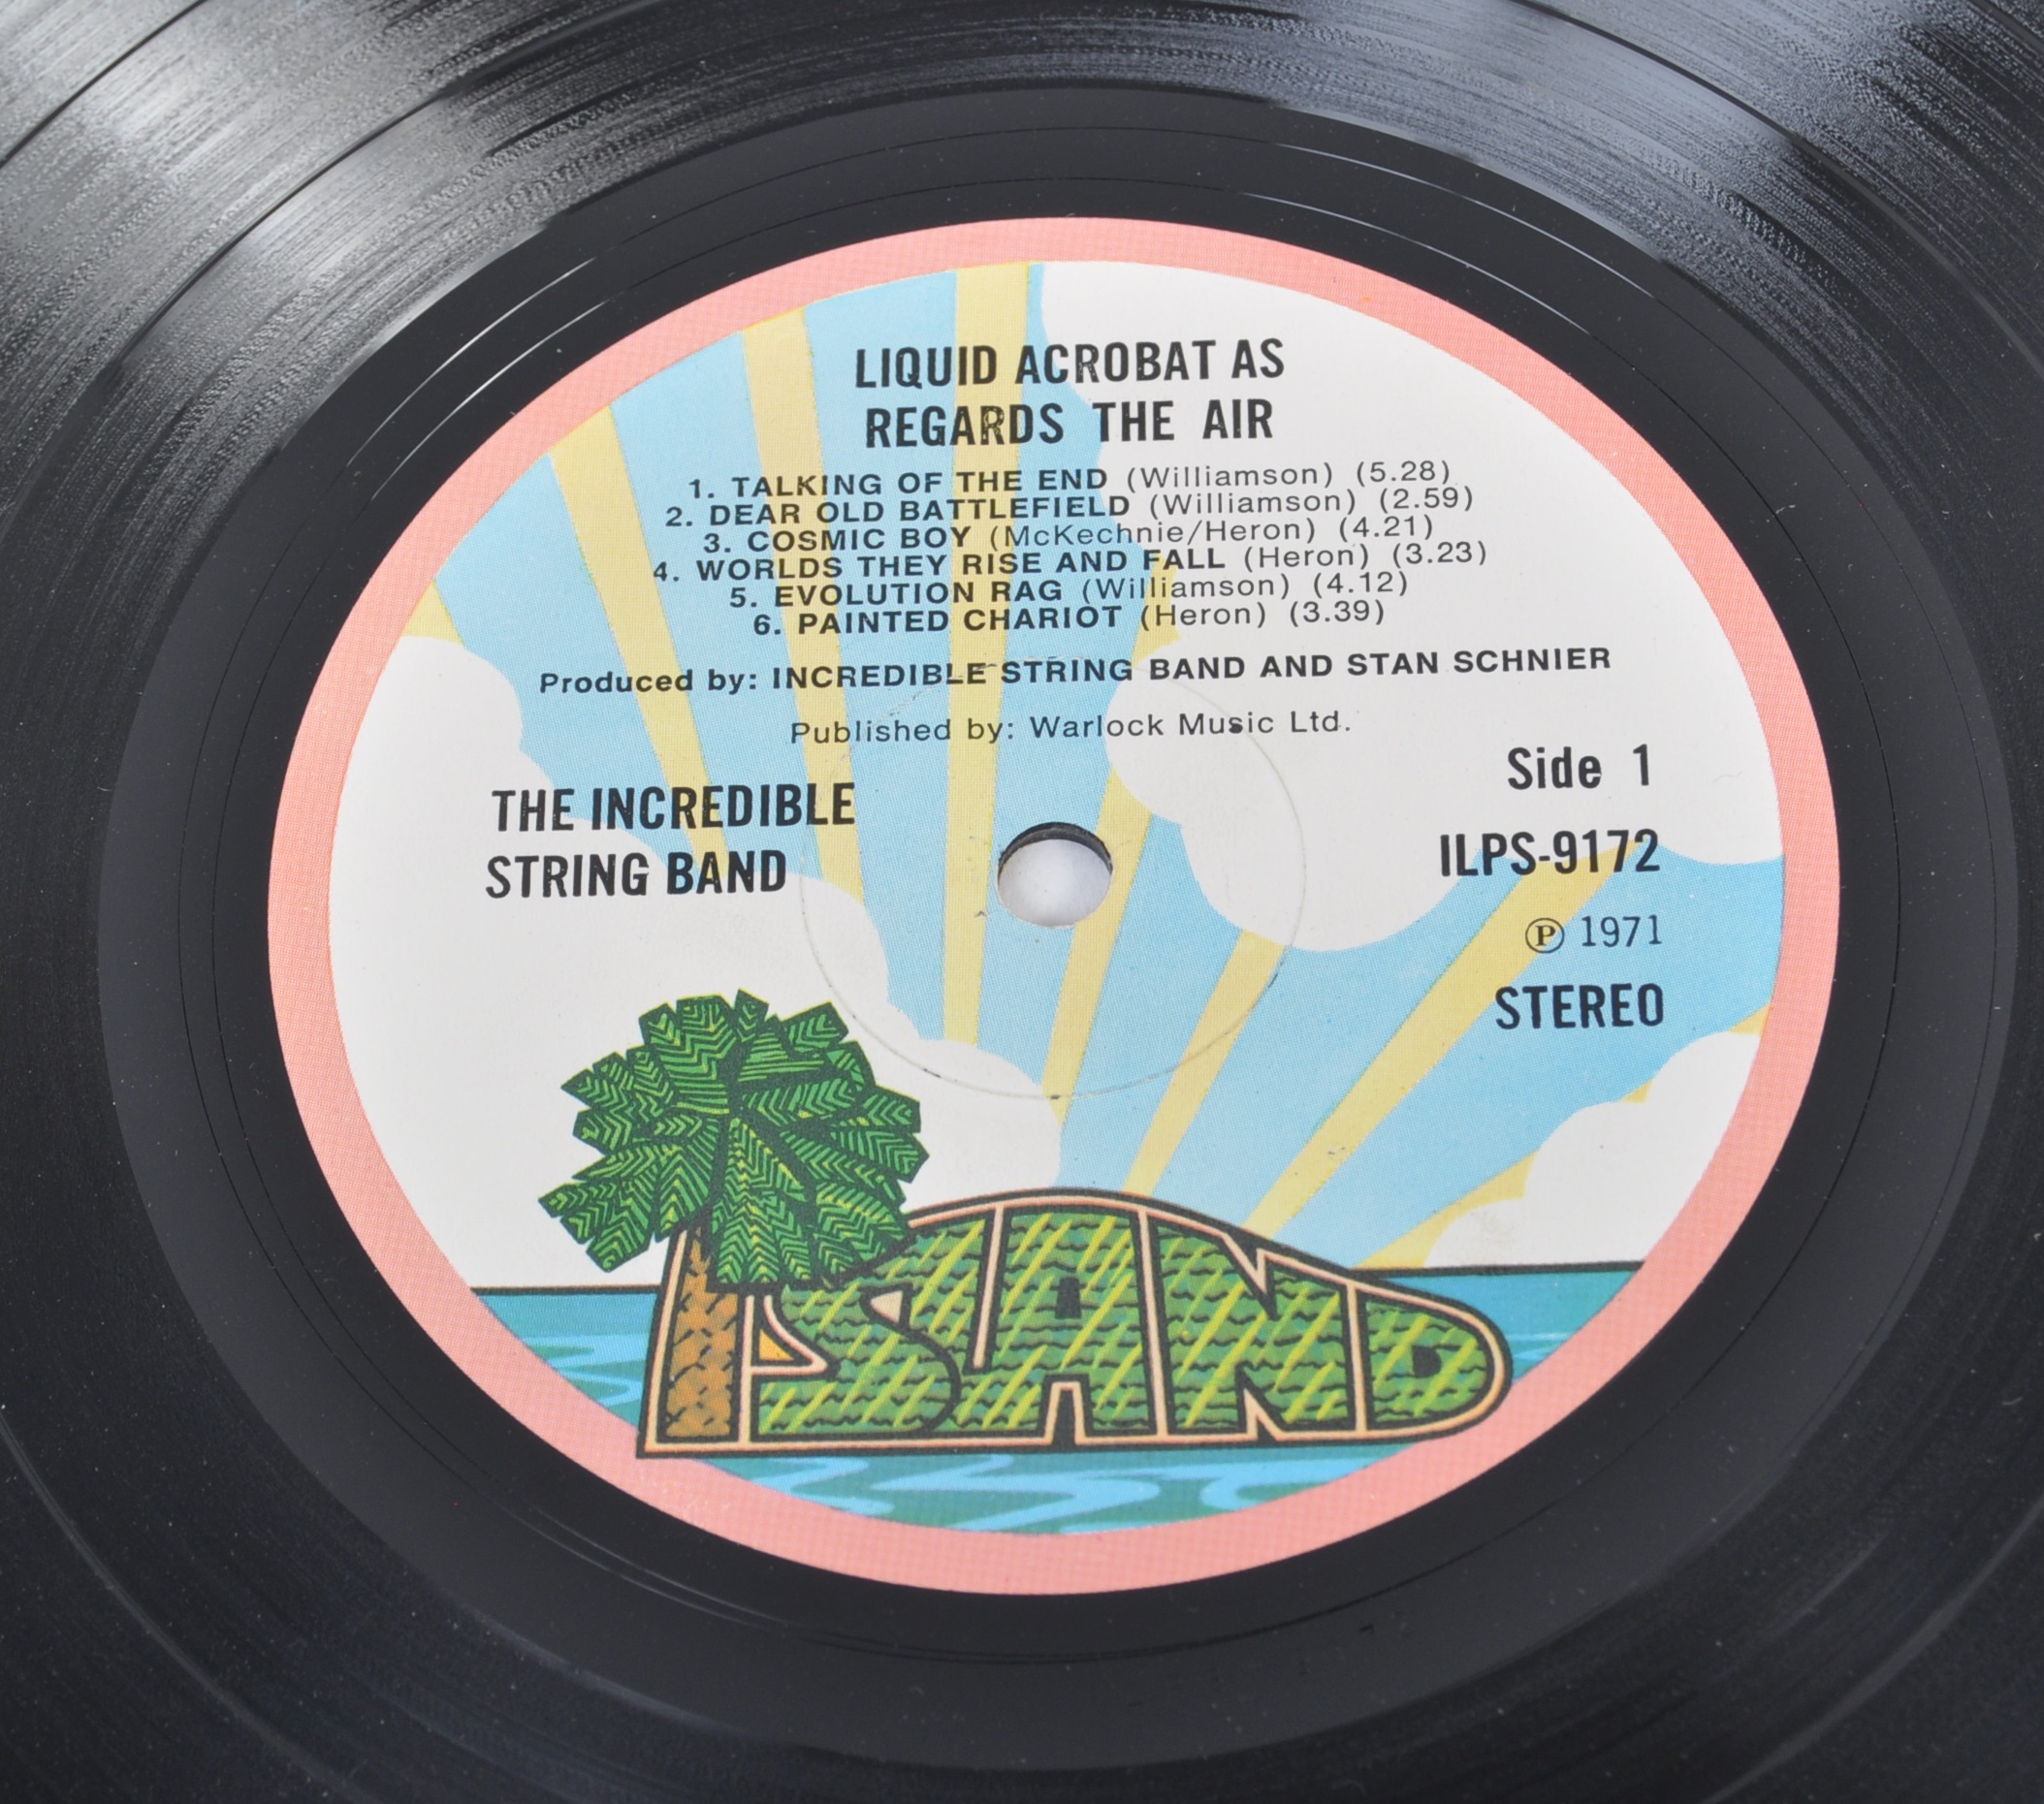 THE INCREDIBLE STRING BAND - TWO VINYL RECORD ALBUMS - Image 5 of 6